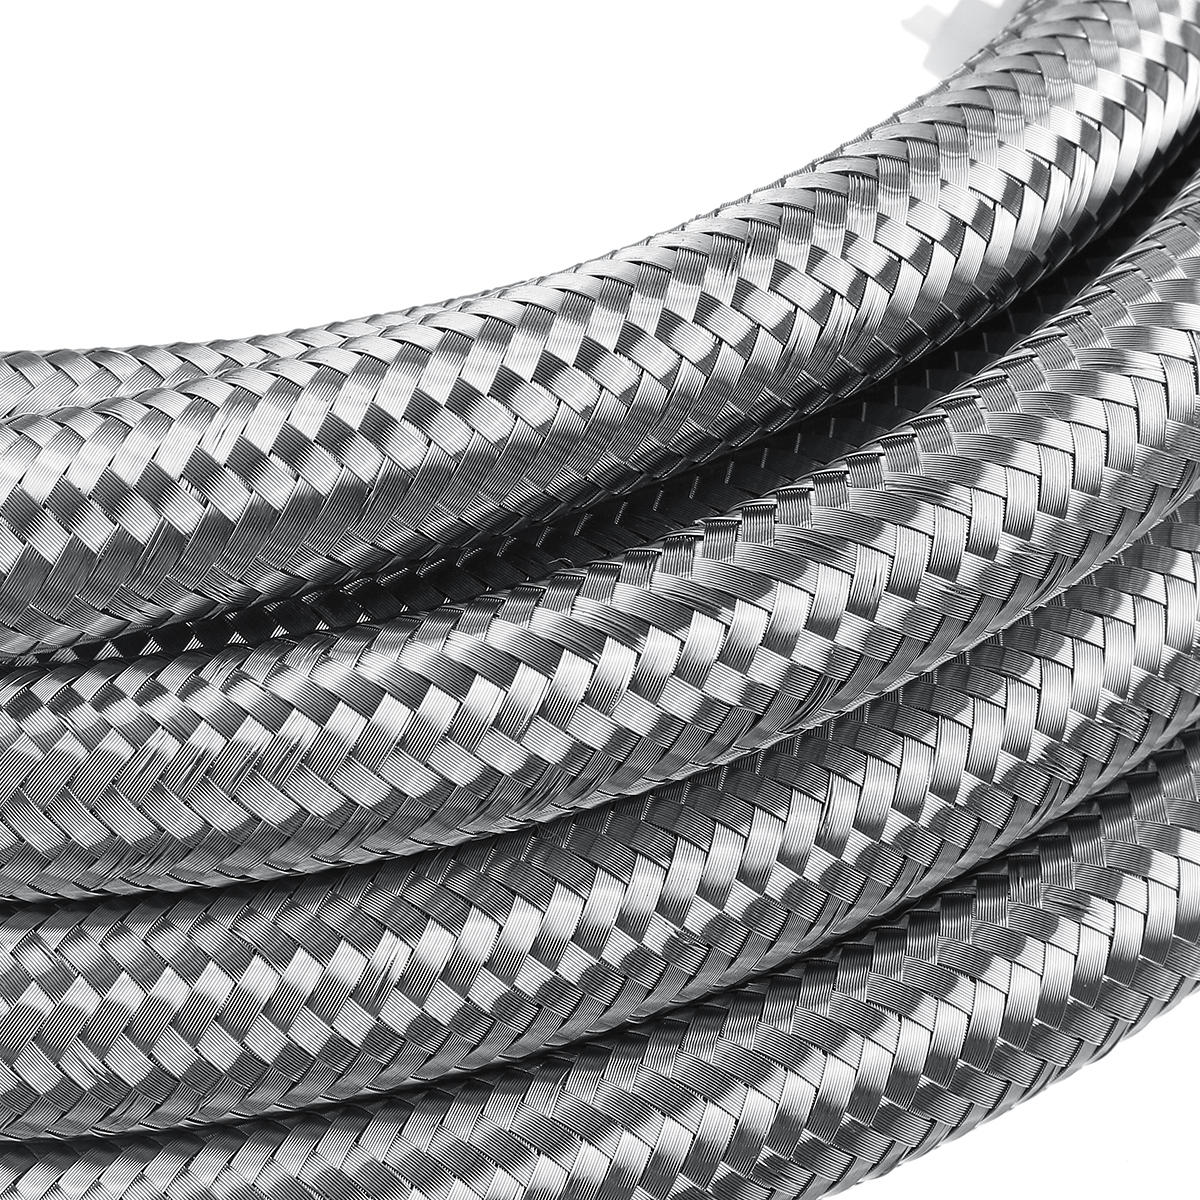 20FT-AN4-AN6-AN8-AN10-Fuel-Hose-Oil-Gas-Line-Pipe-Stainless-Steel-Braided-1685155-5